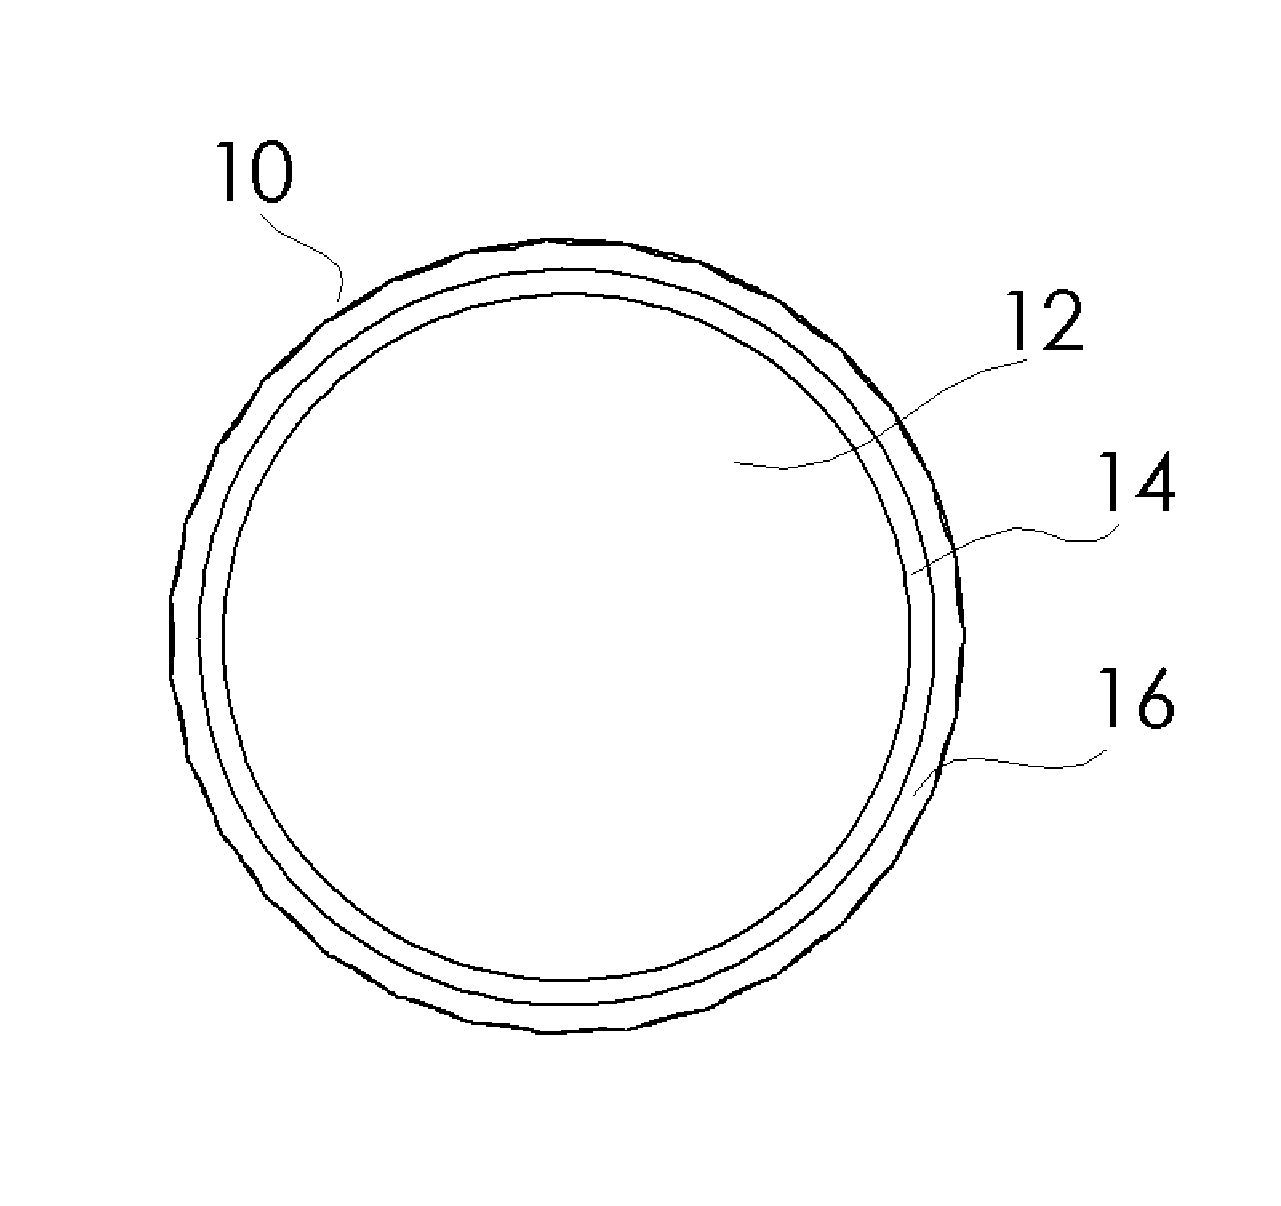 Multi-piece golf ball comprising low hardness gradient core